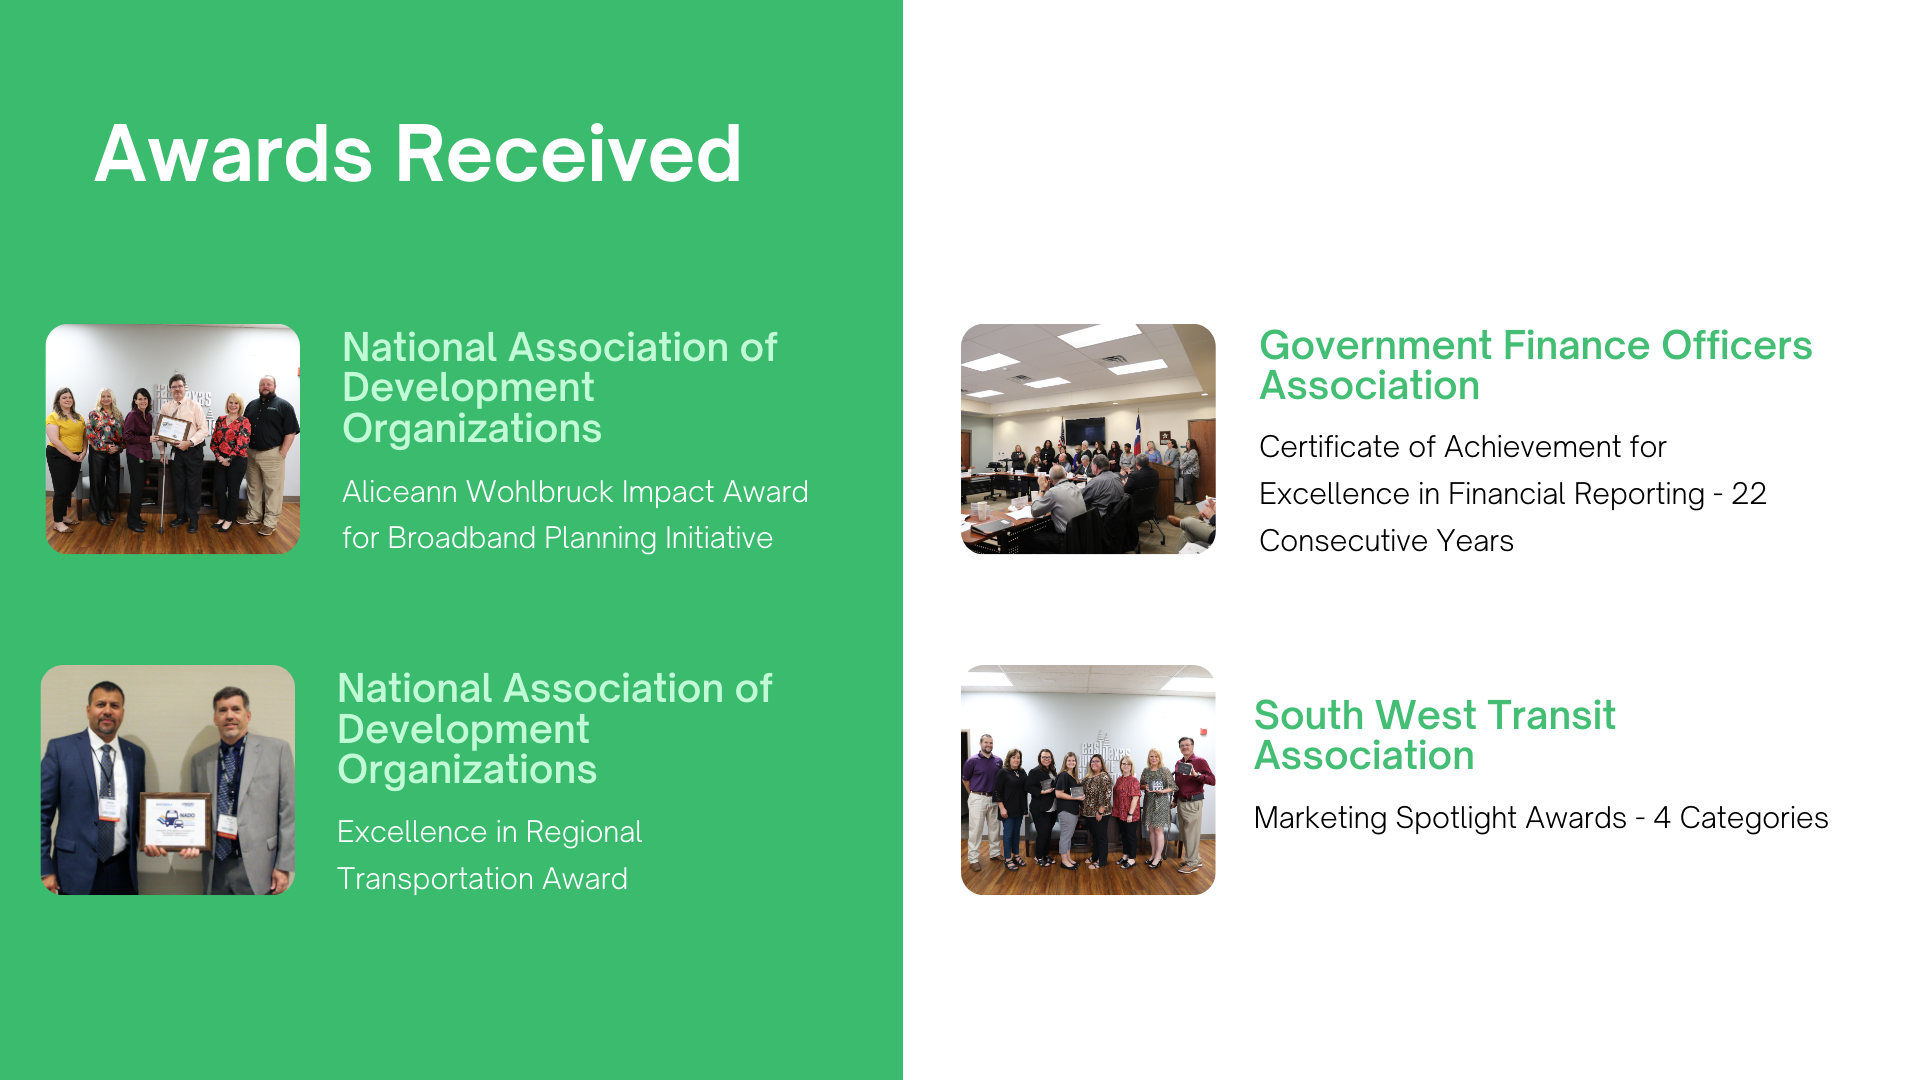 Awards received by national association of development organizations , national association of development organizations , and south west transit